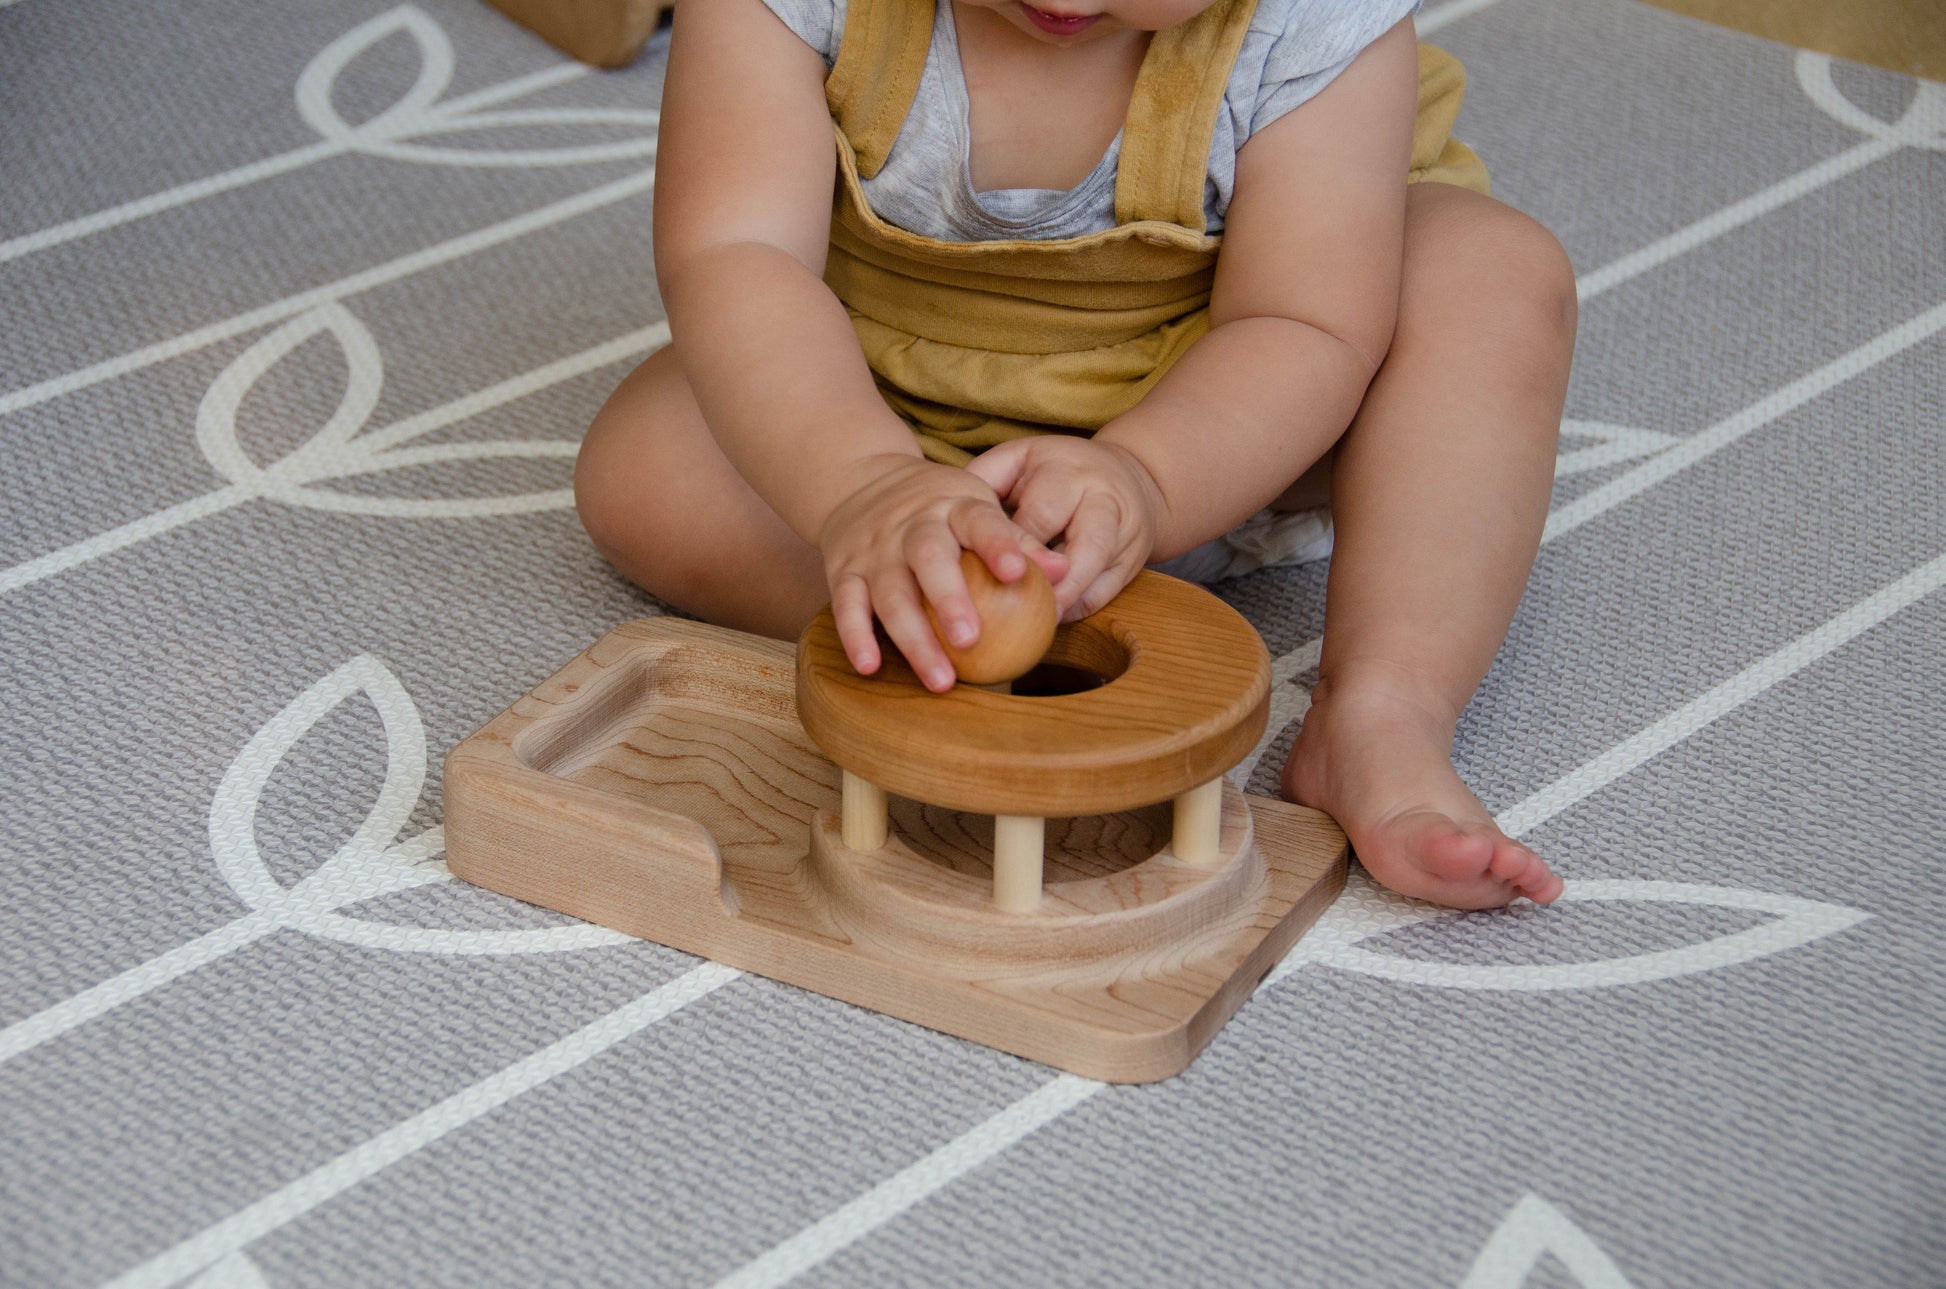 The baby girl is engrossed in play with the Permanence Box, a classic Montessori toy. With great curiosity and excitement, she explores the various compartments, practicing her hand-eye coordination and fine motor skills as she discovers the joy of fitting objects into their designated spaces. This educational and interactive playtime experience helps her develop an understanding of object permanence and spatial relationships, providing a foundation for her cognitive development.